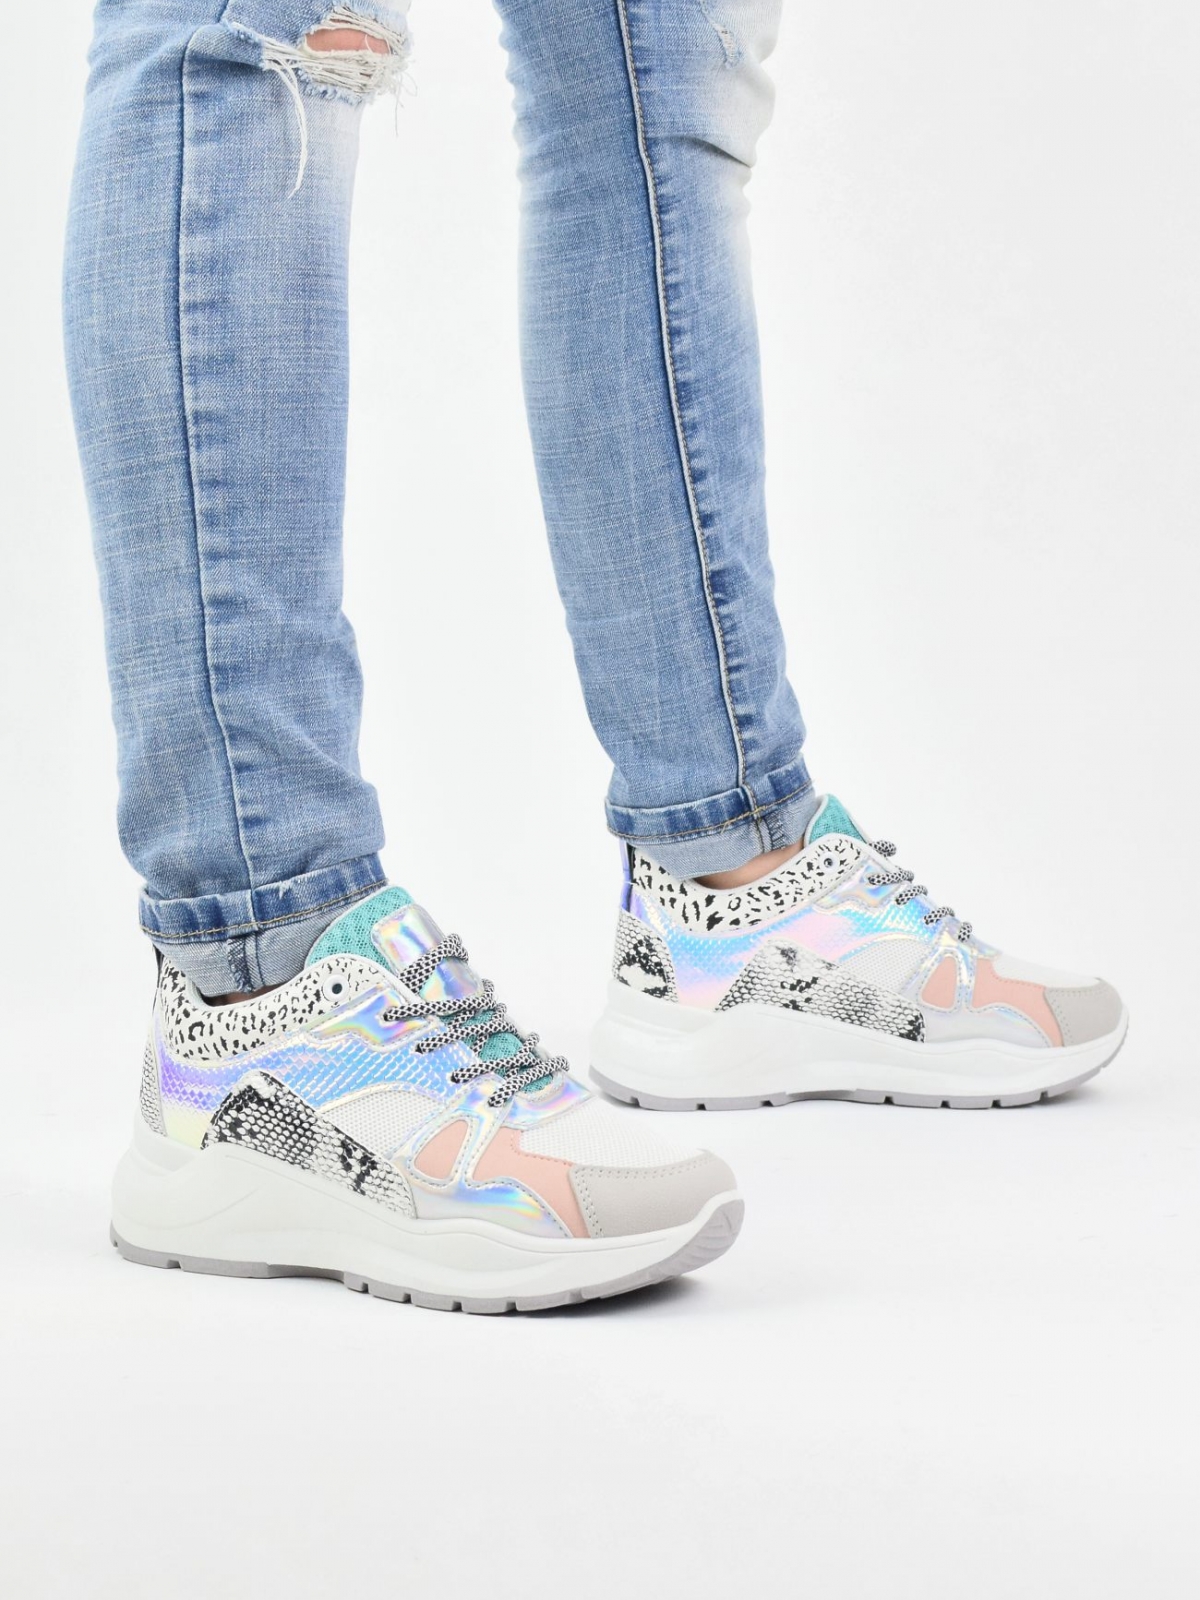 Exclusive design women's sneakers in different patterns